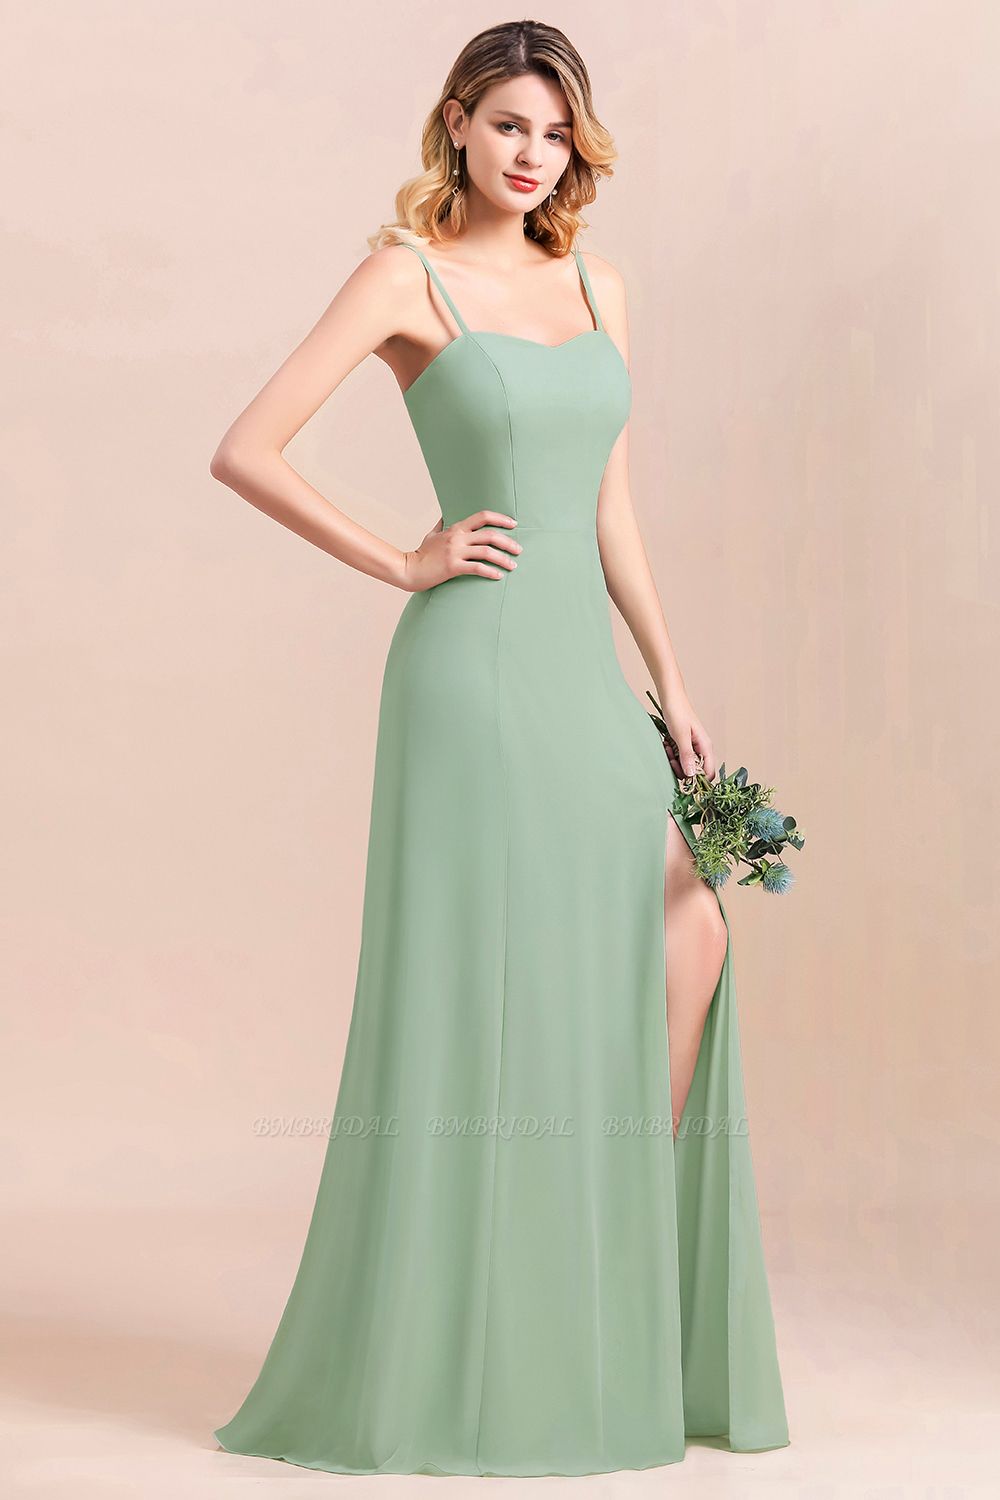 BMbridal Dusty Sage Spaghetti Straps Sweetheart Affordable Bridesmaid Dress